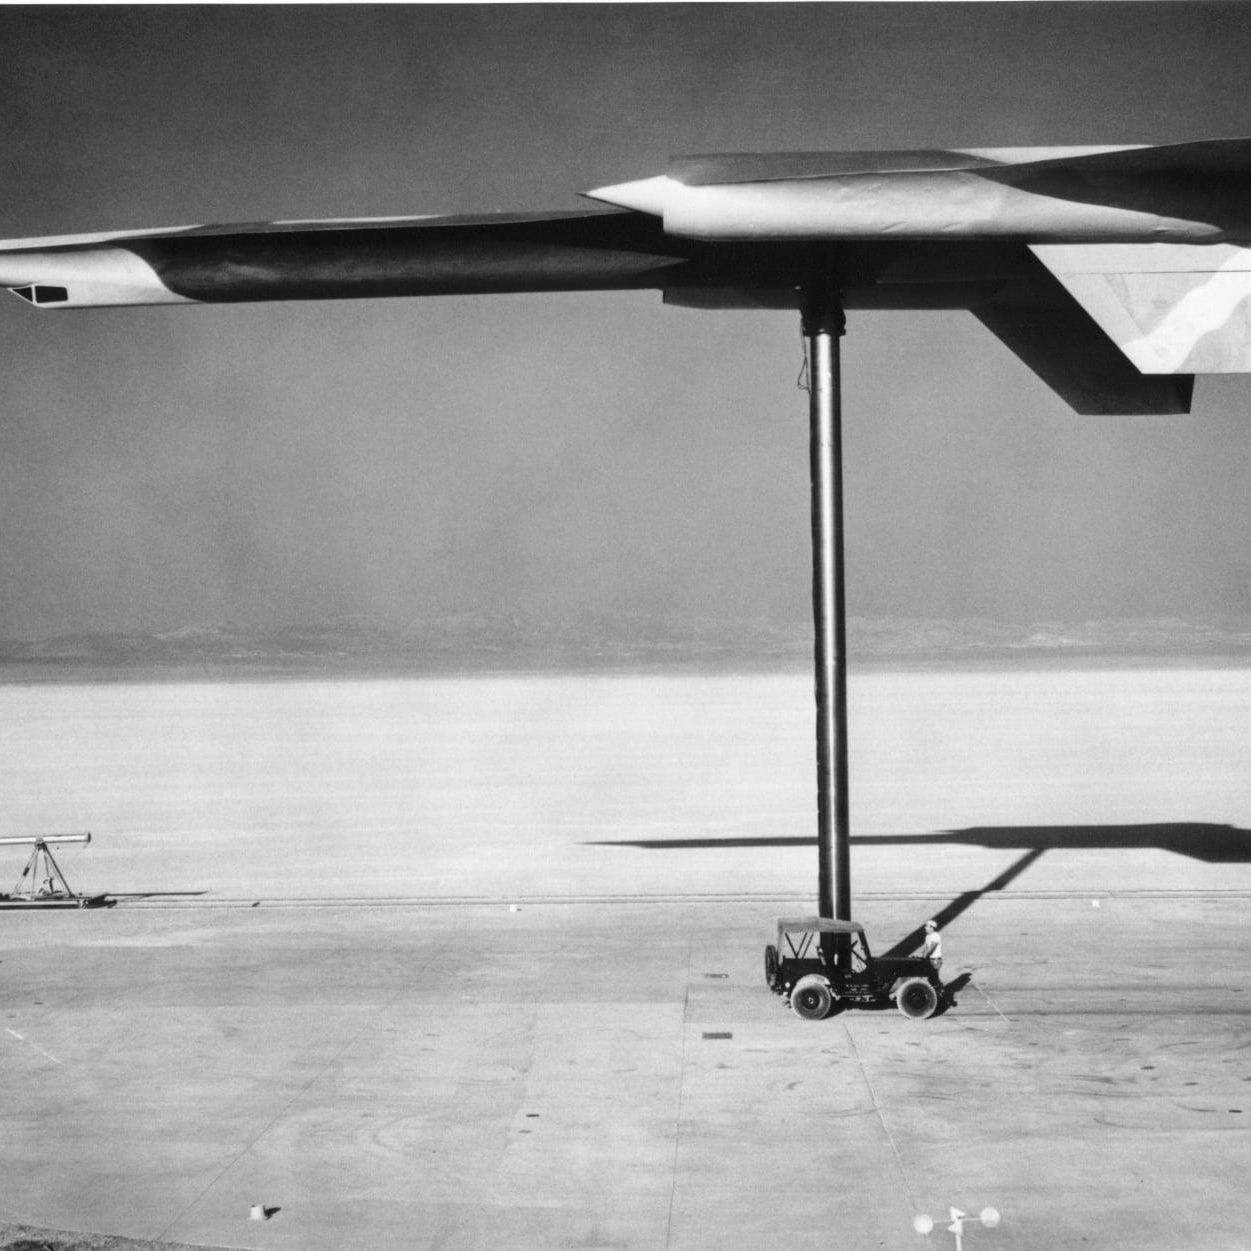 See Declassified Photos of the CIA's Secret Spy Plane in Area 51